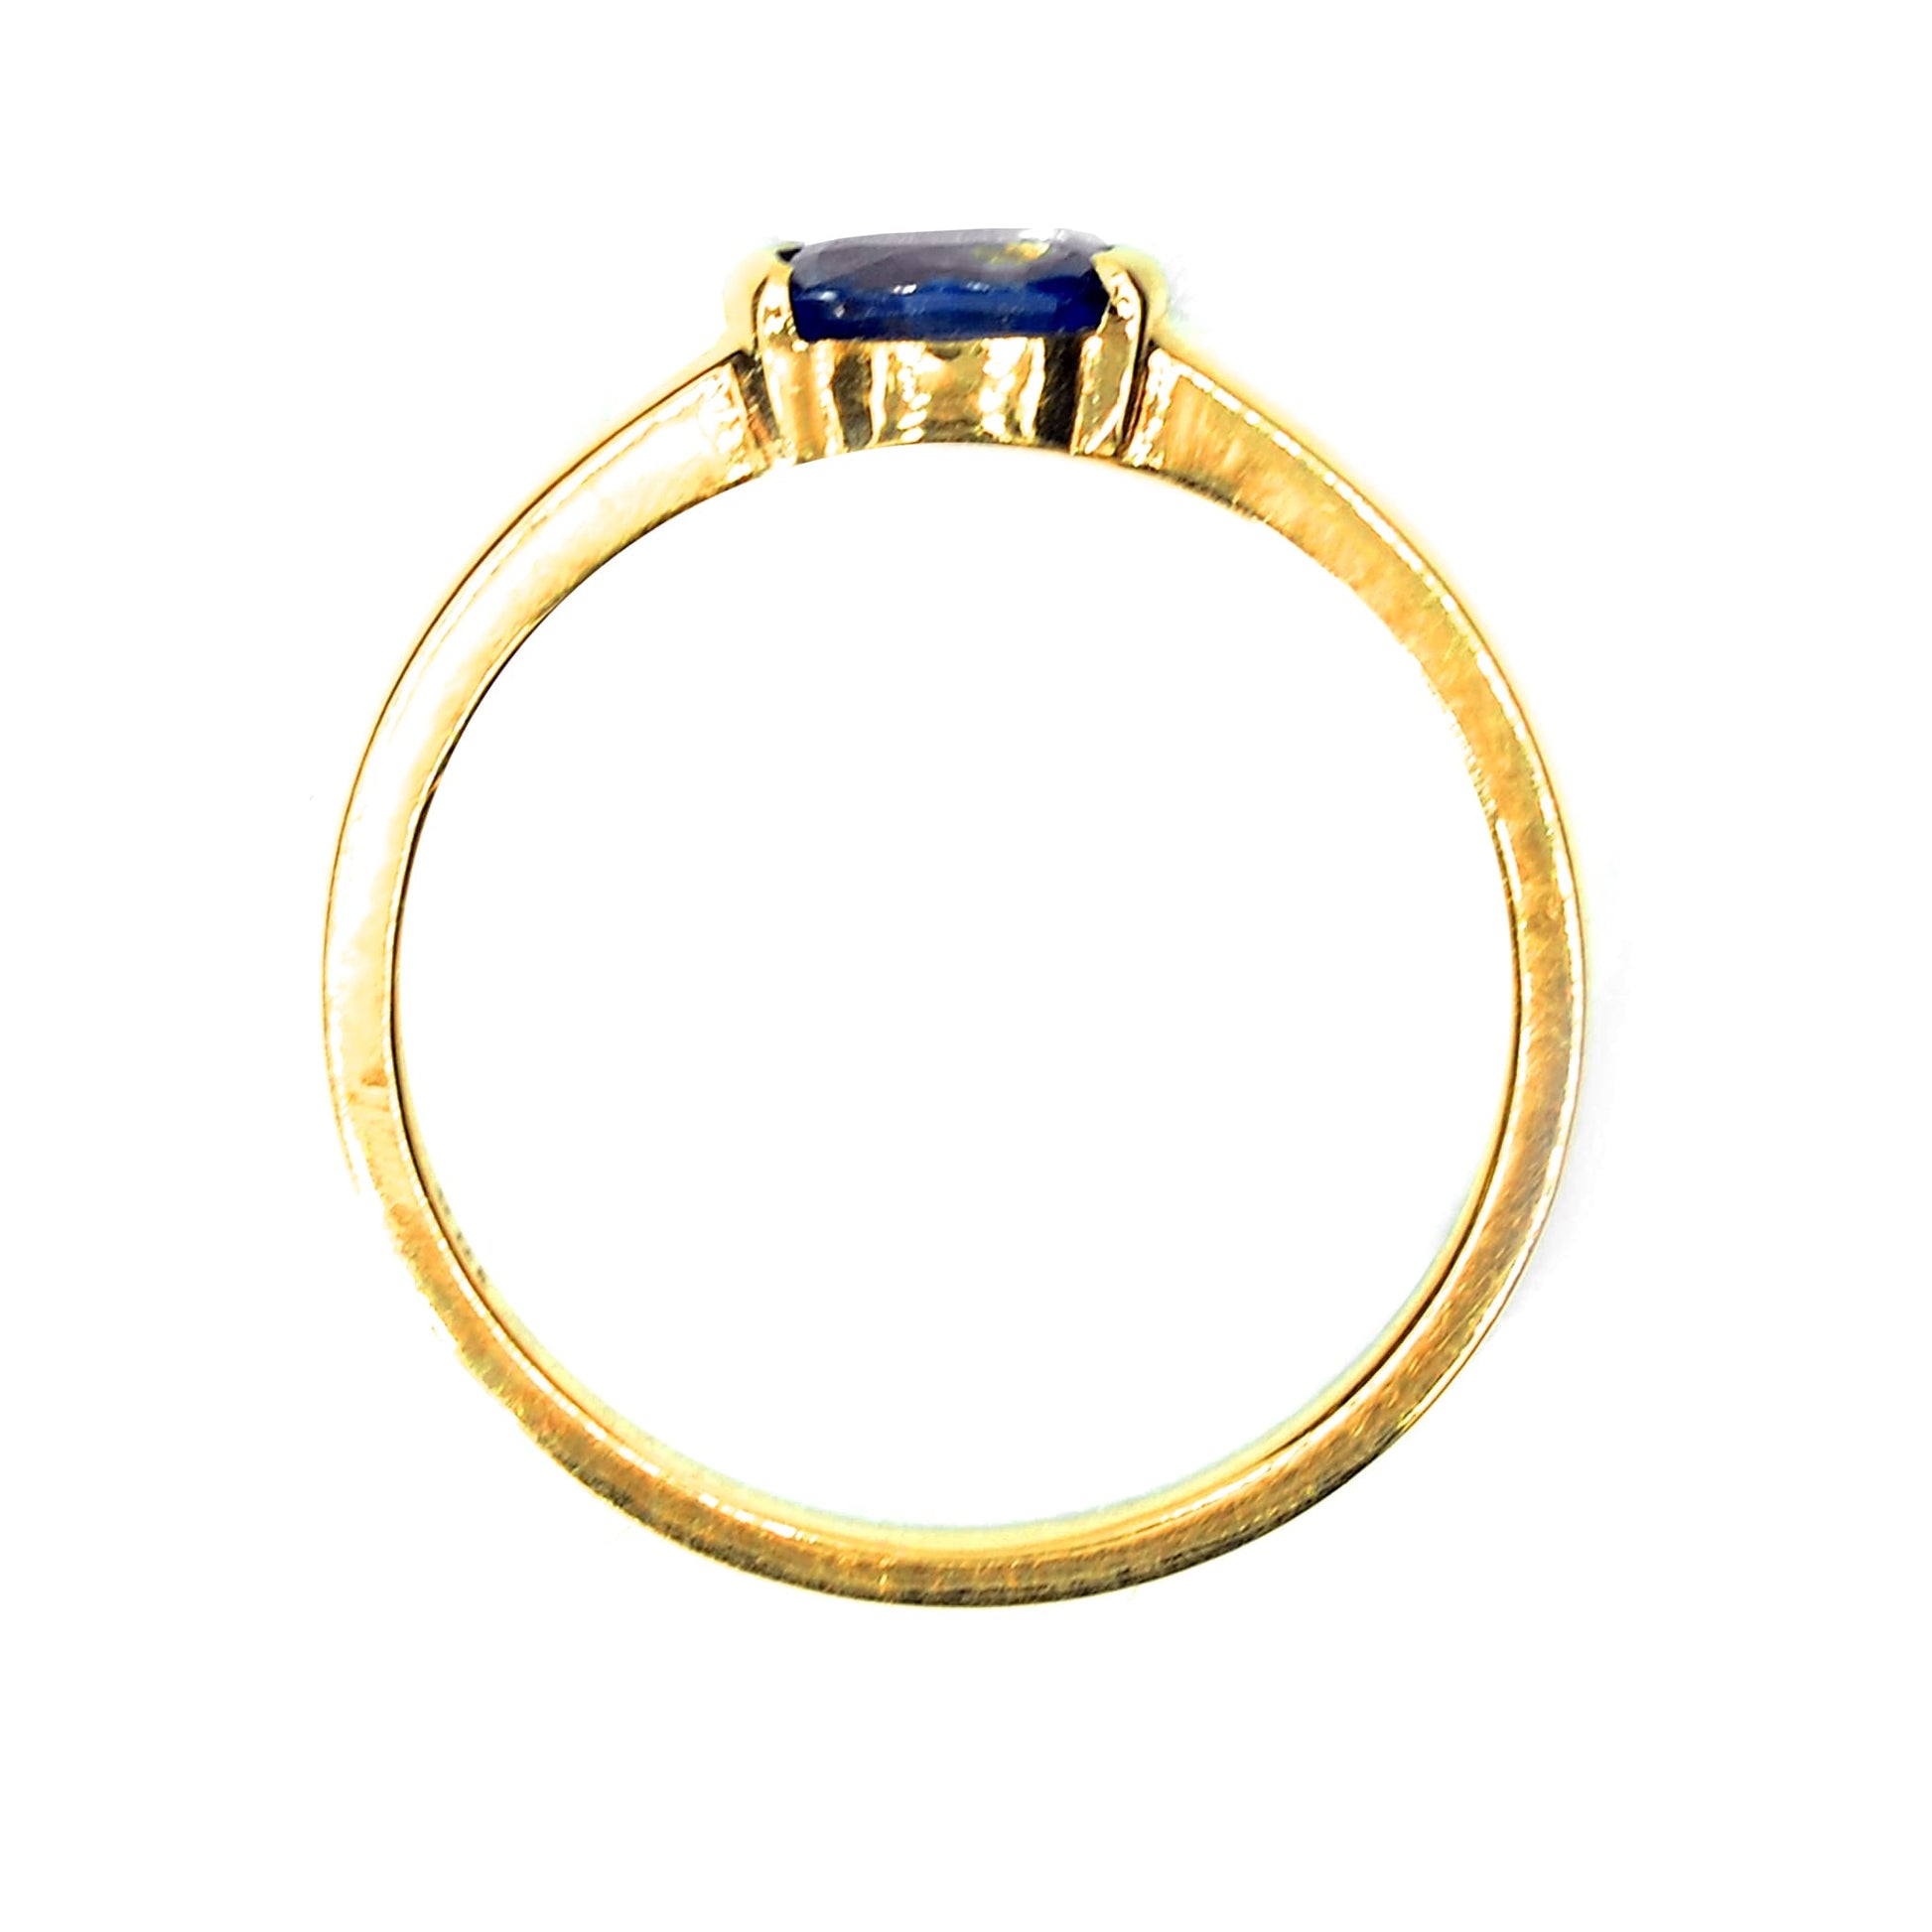 Low setting blue sapphire 18K yellow gold ring